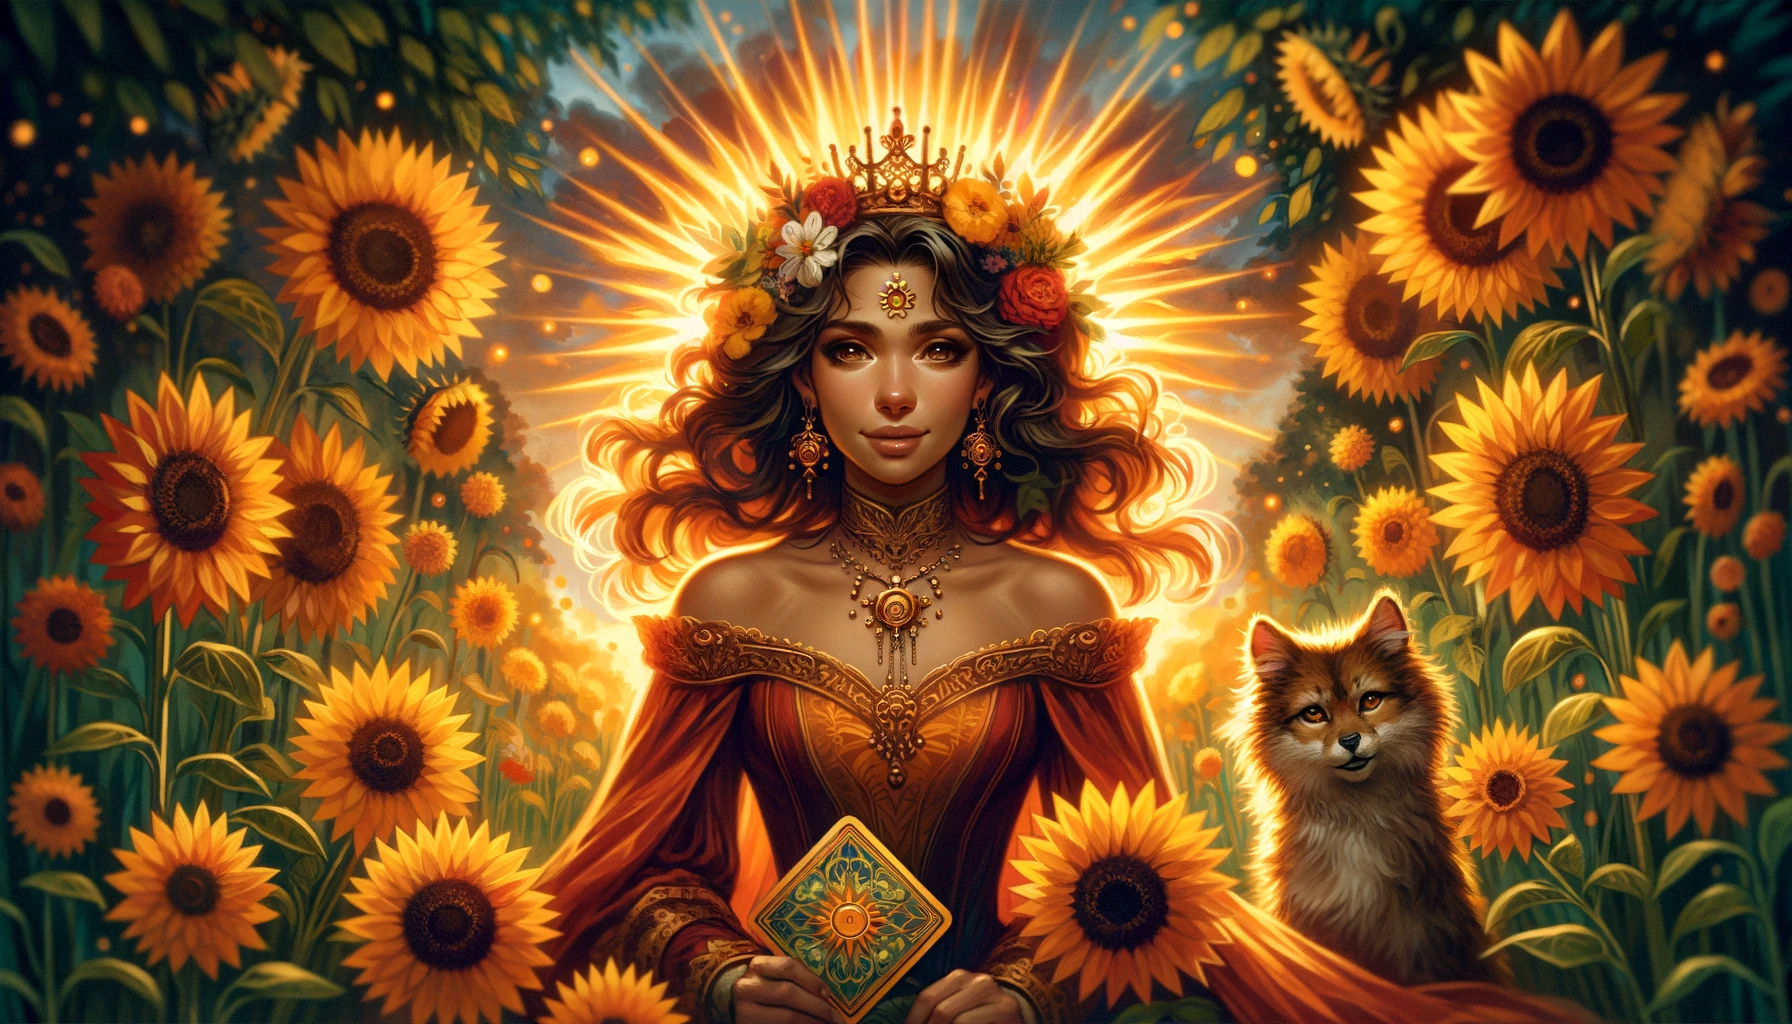 An illustration portraying the embodiment of passion, confidence, and charisma through the Queen of Wands, depicted in a lush garden surrounded by blooming sunflowers, symbolizing her joyous and nurturing spirit, exuding a strong sense of self-assuredness.